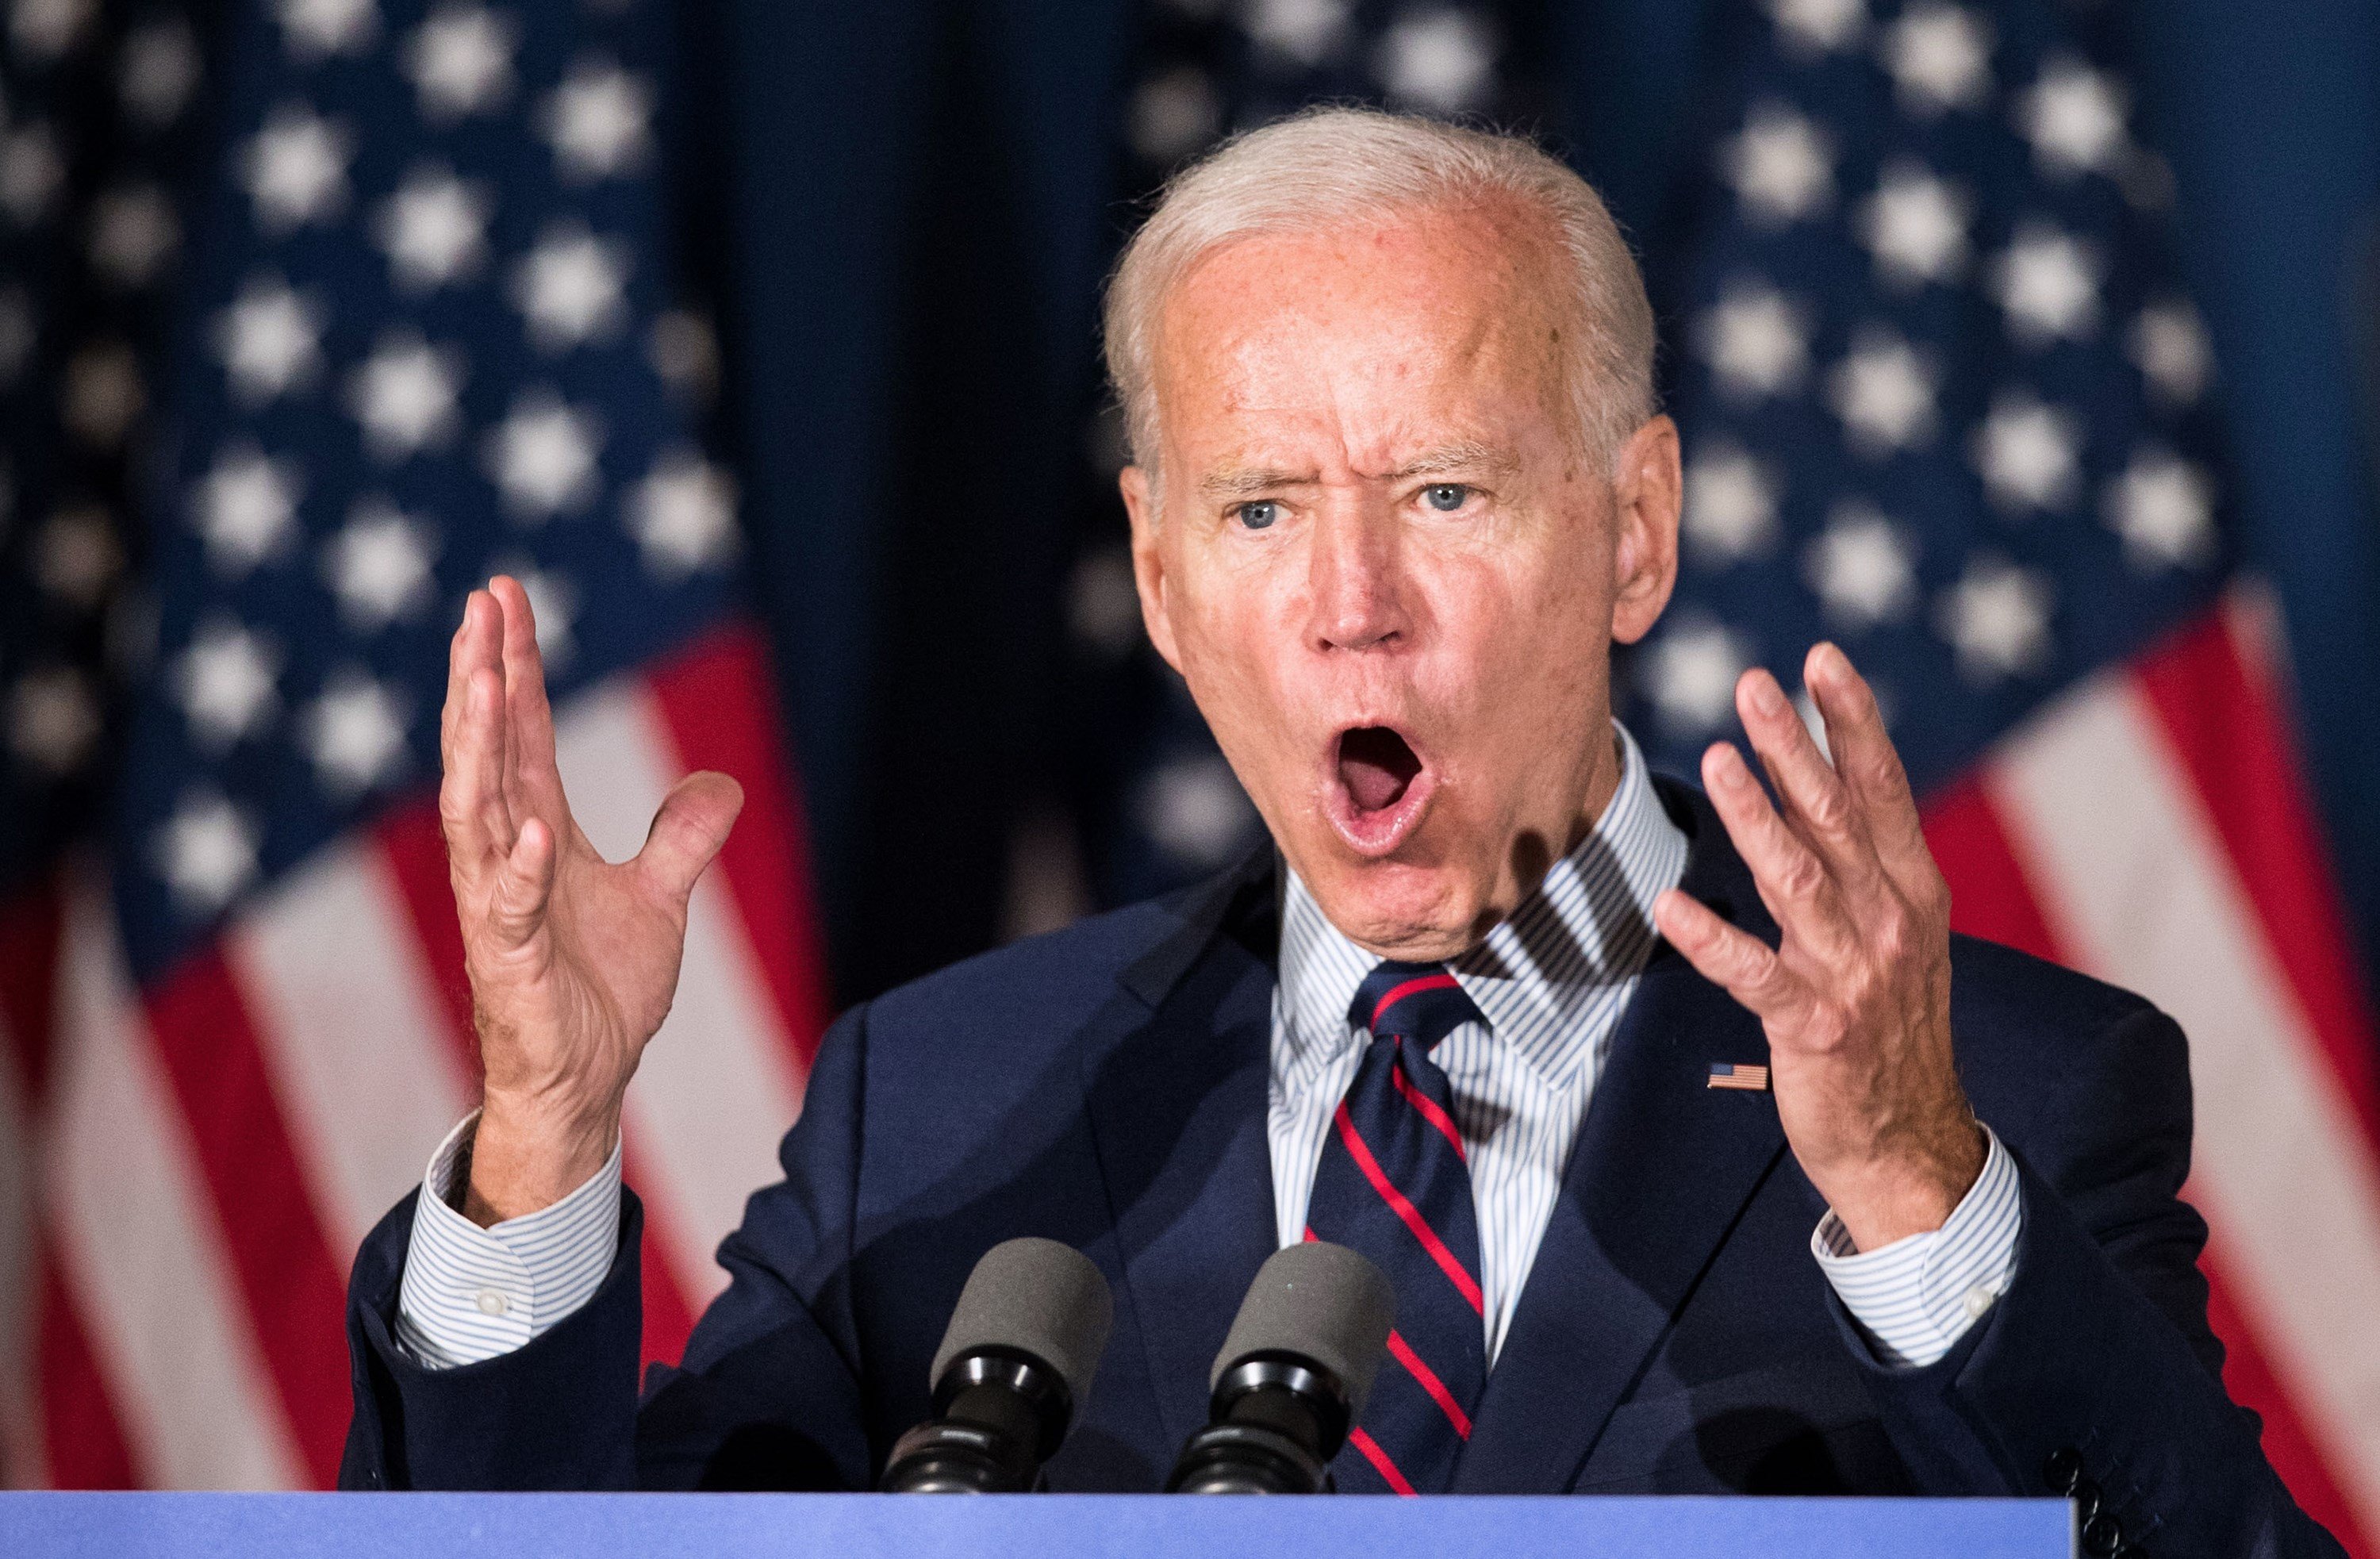 Democratic presidential candidate Joe Biden speaks during a campaign event in Rochester, New Hampshire, on Wednesday. Photo: AFP